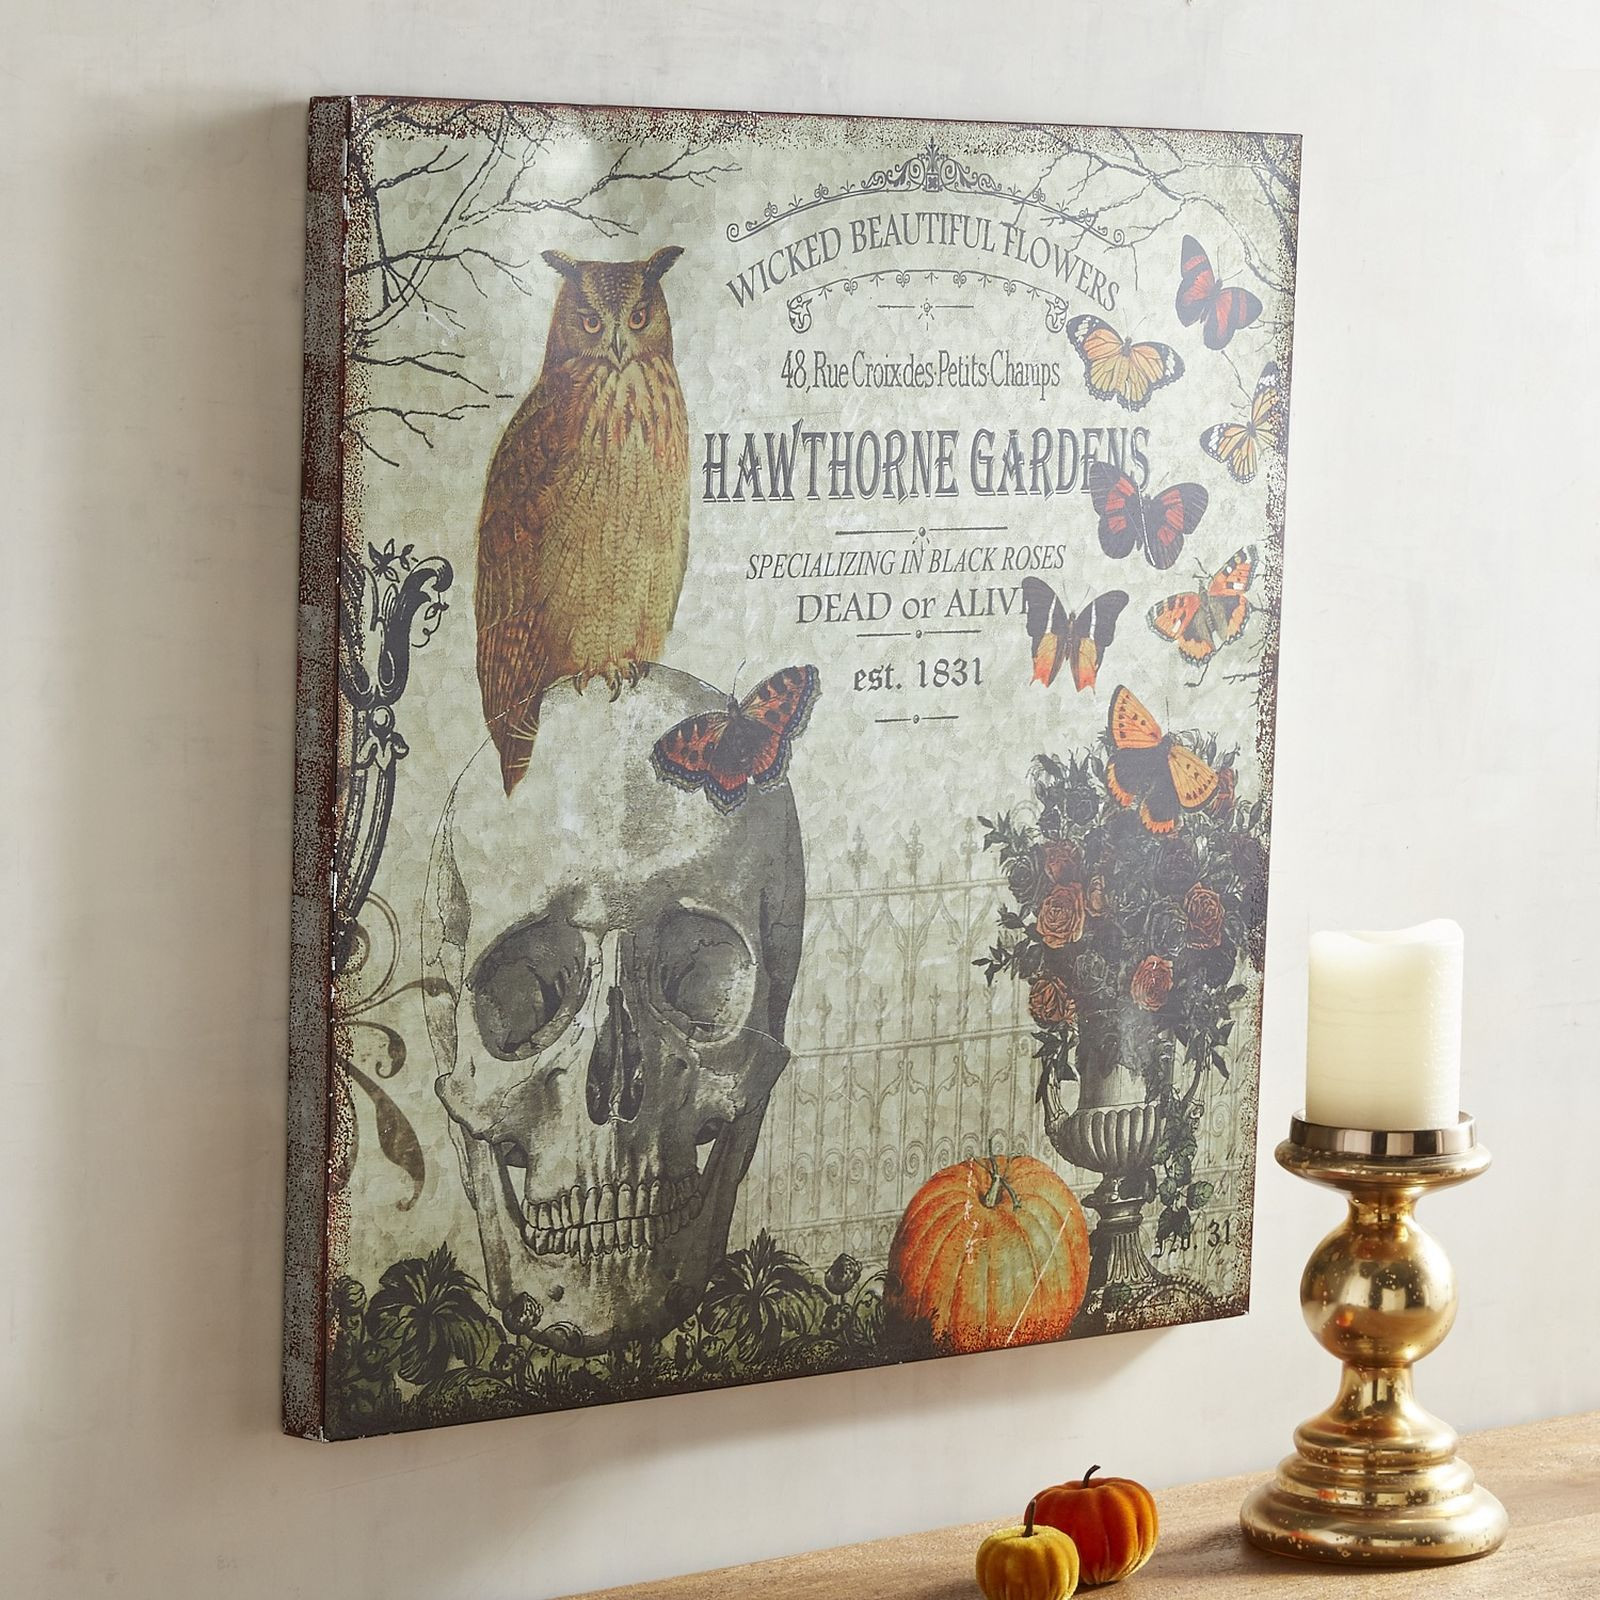 20 Awesome Pier 1 Owl Vase 2024 free download pier 1 owl vase of hawthorne gardens with owl wall decor pier 1 imports halloween with regard to hawthorne gardens with owl wall decor pier 1 imports